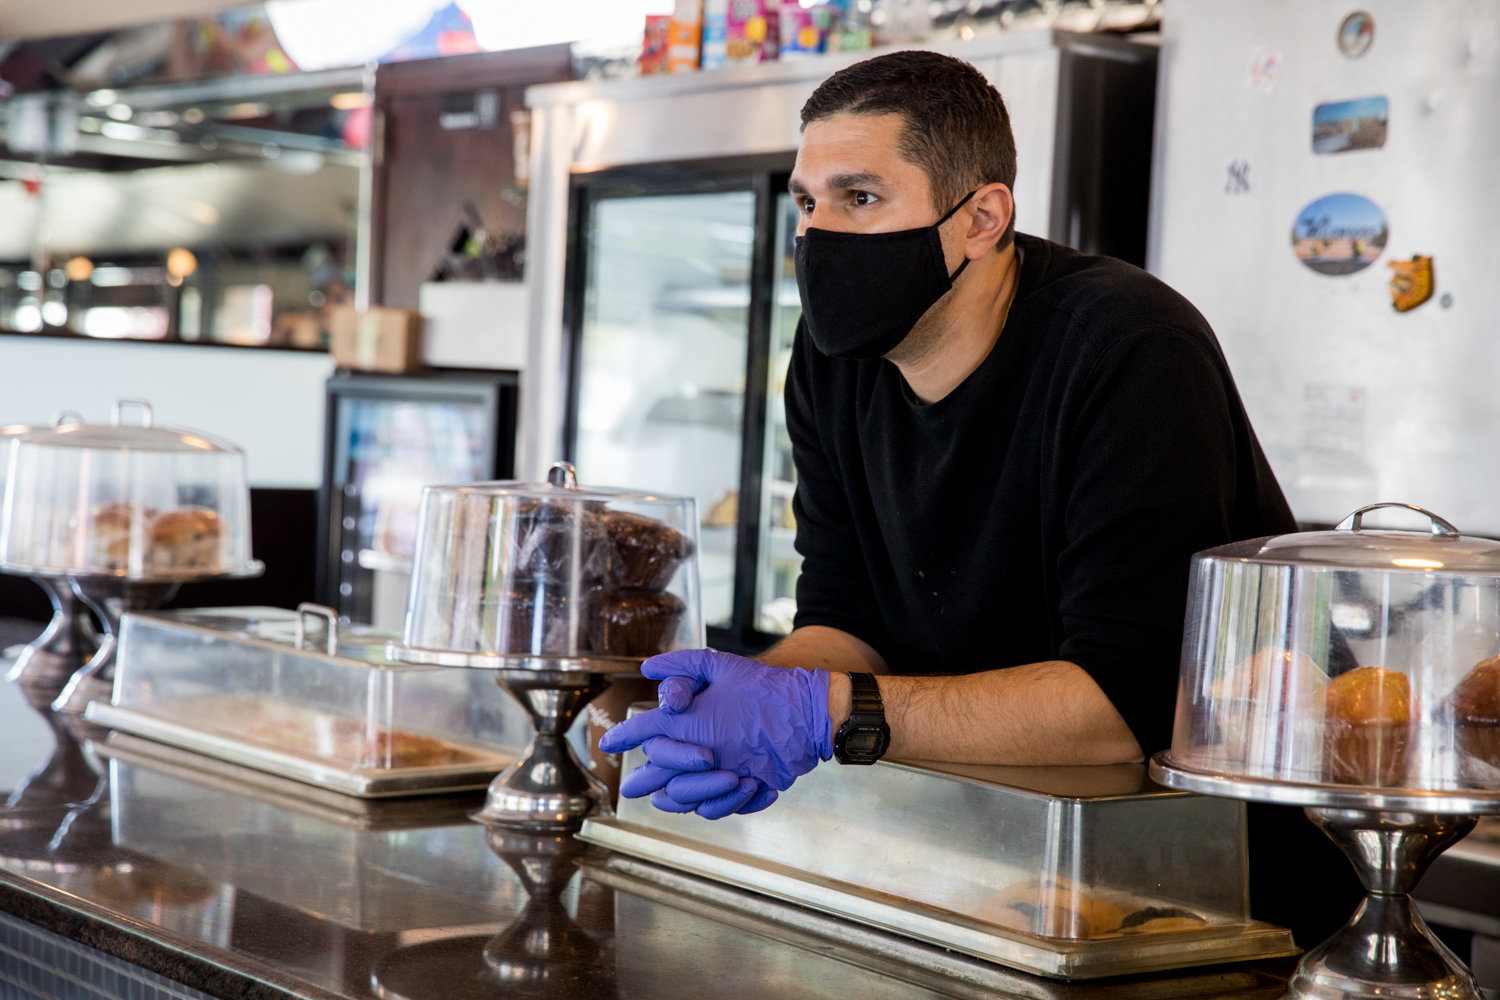 Nick Diakakis looks out from behind the counter at Tibbett Diner, which has been struggling in the face of the coronavirus pandemic. While it has reopened for takeout and delivery, business is not what it used to be.